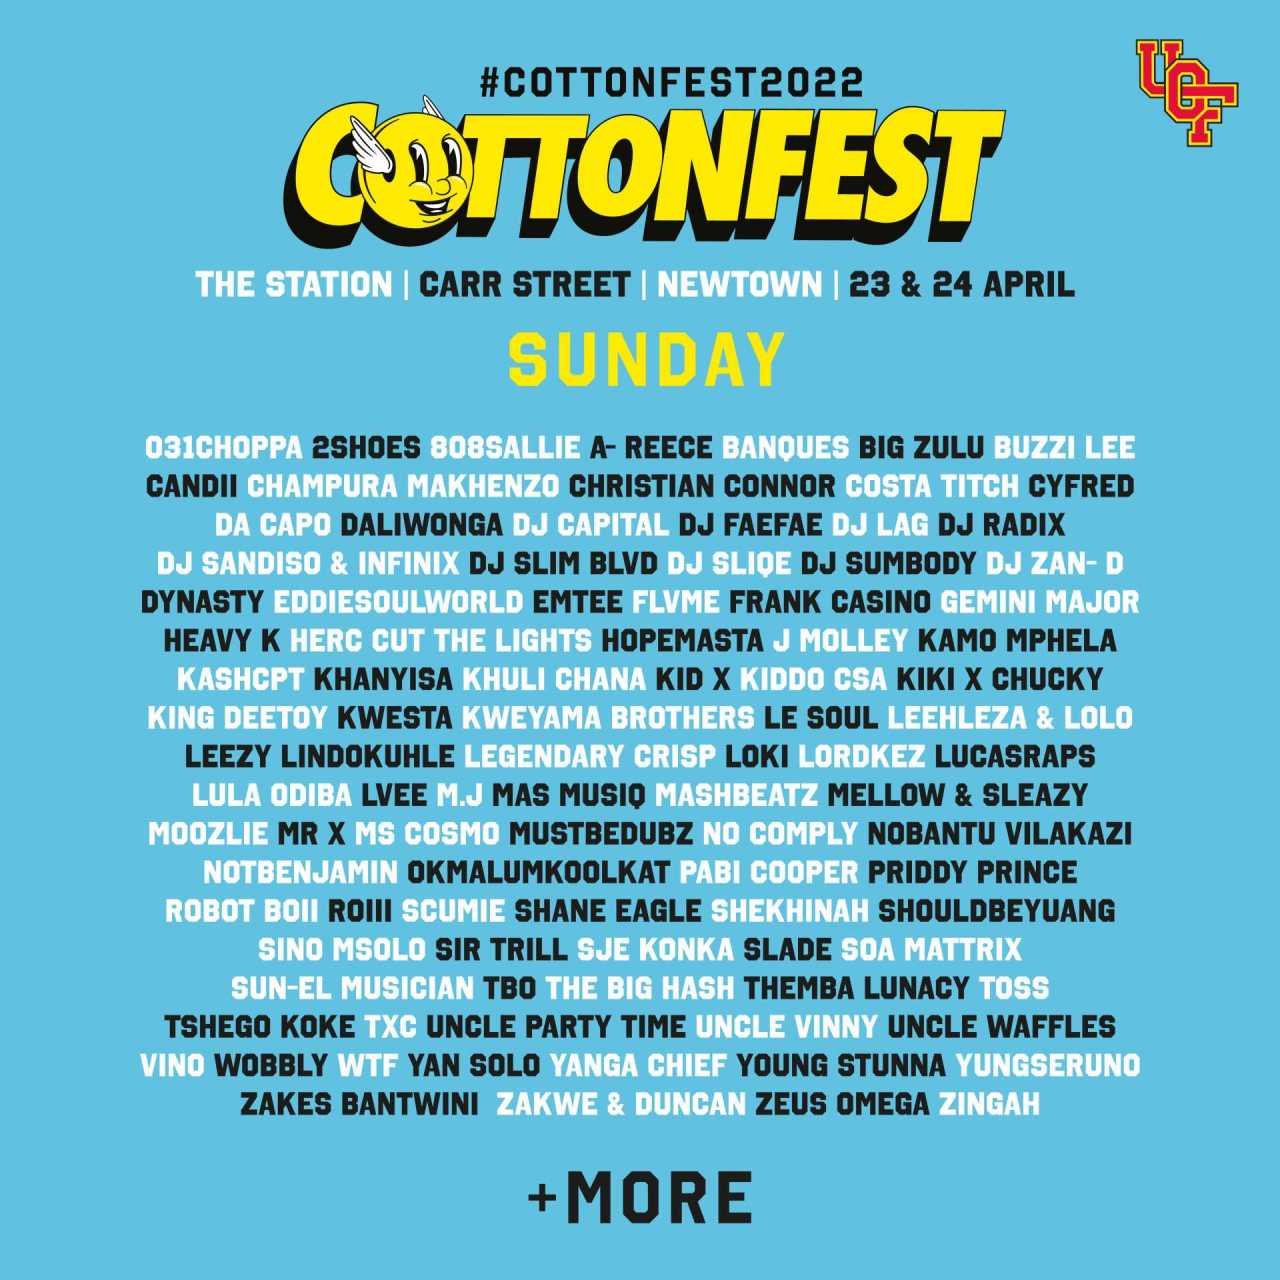 Cotton Fest lineup confirmed with Uncle Vinny being the host